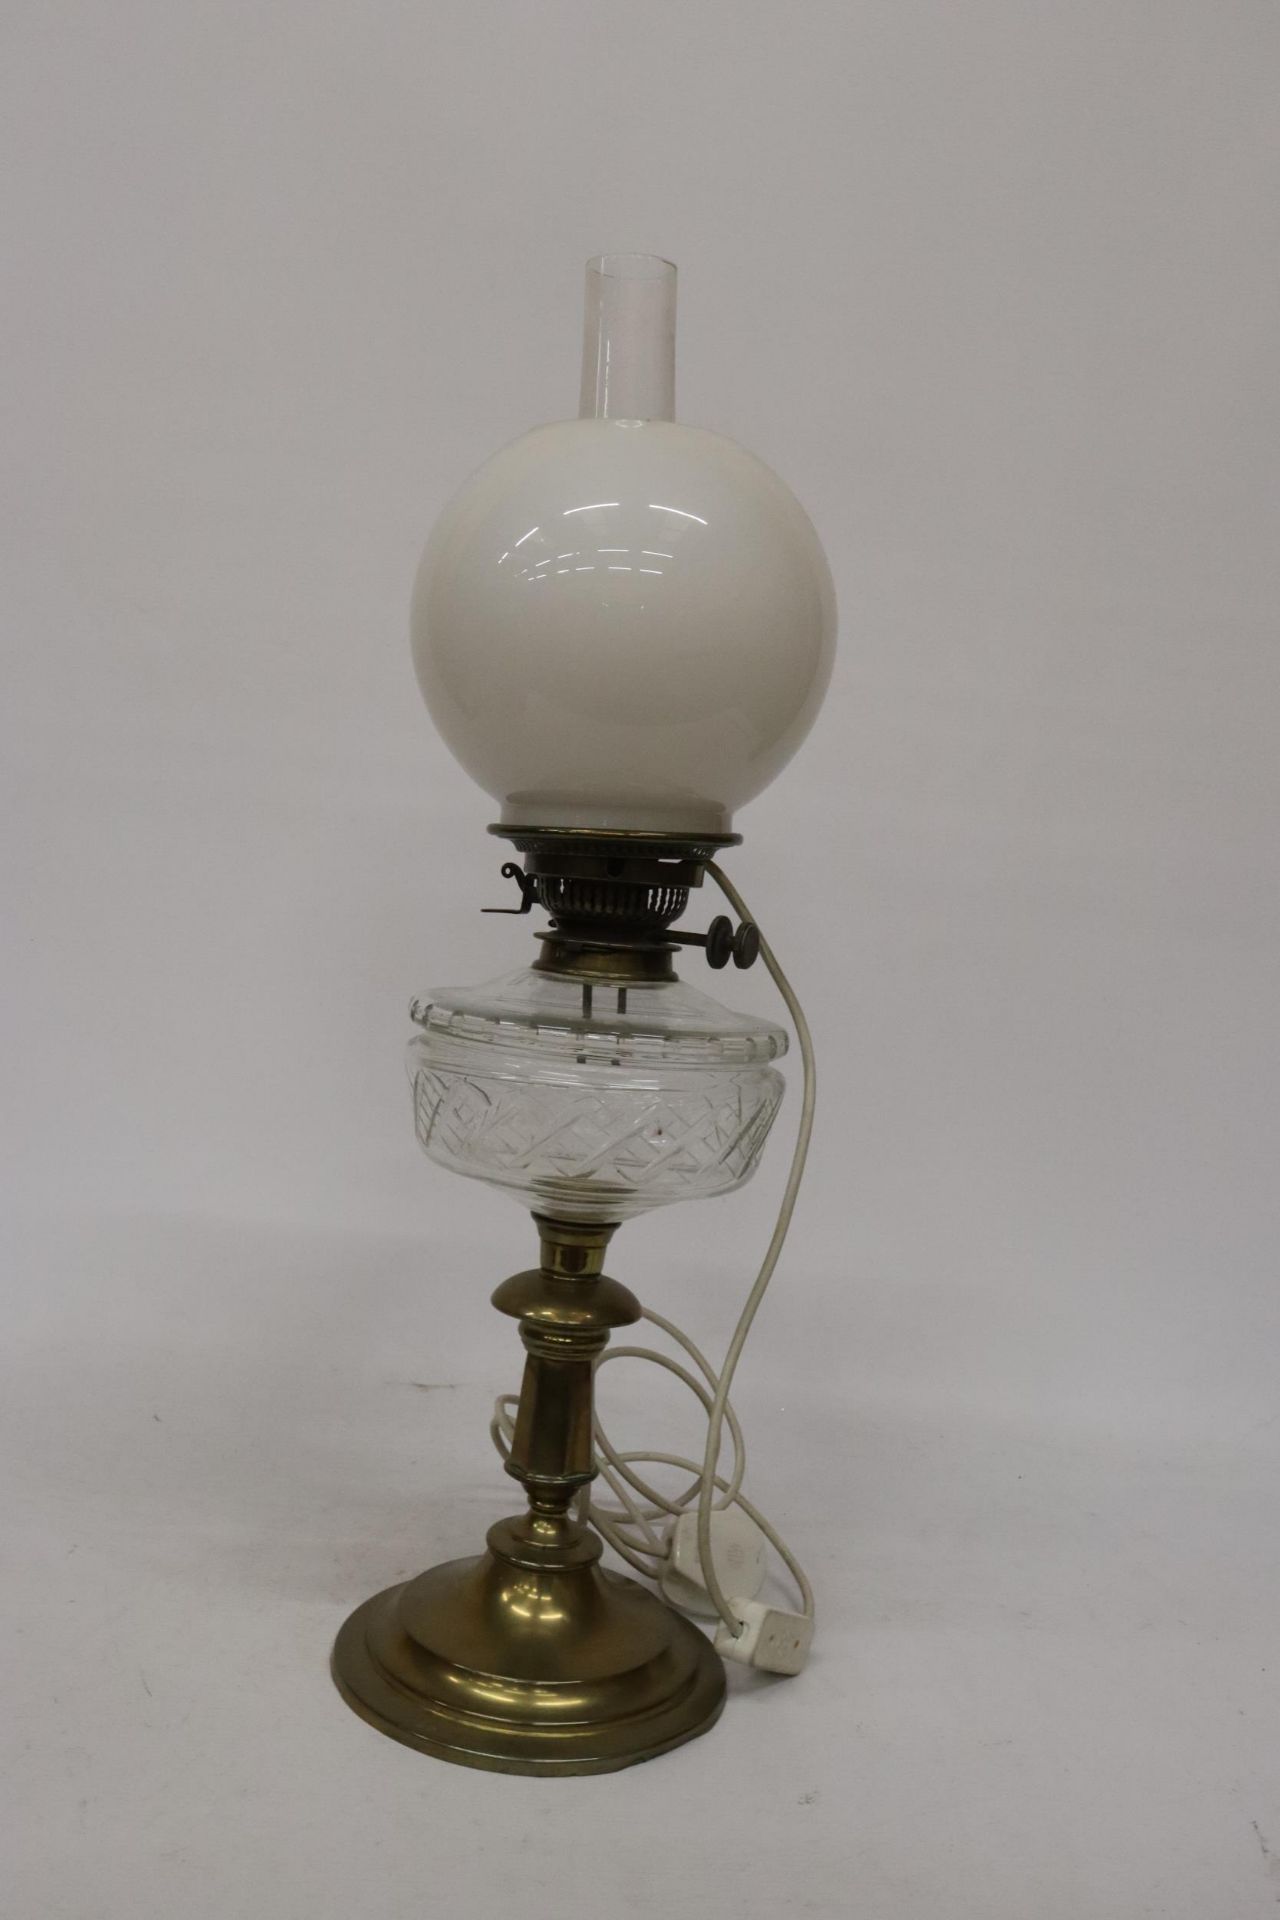 A 19TH CENTURY OIL LAMP CONVERTED TO ELECTRIC WITH A BRASS BASE, CLEAR CUT GLASS RESERVOIR, MILK - Image 2 of 8